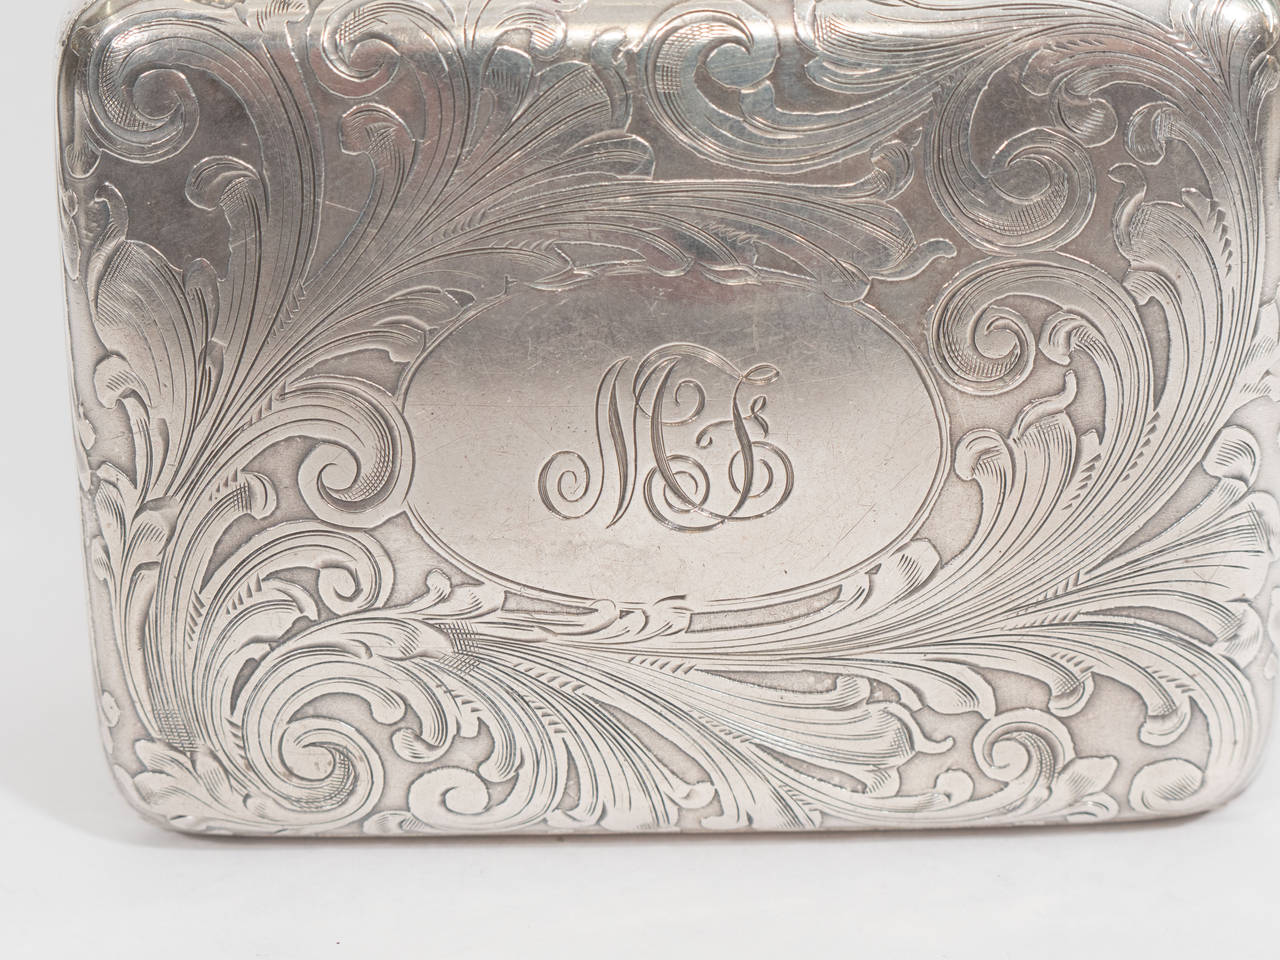 A sterling silver Art Nouveau decorative box or case by Tiffany & Co with gold clasp. This was formerly a purse.

Good vintage condition with age appropriate patina. Some scratches.